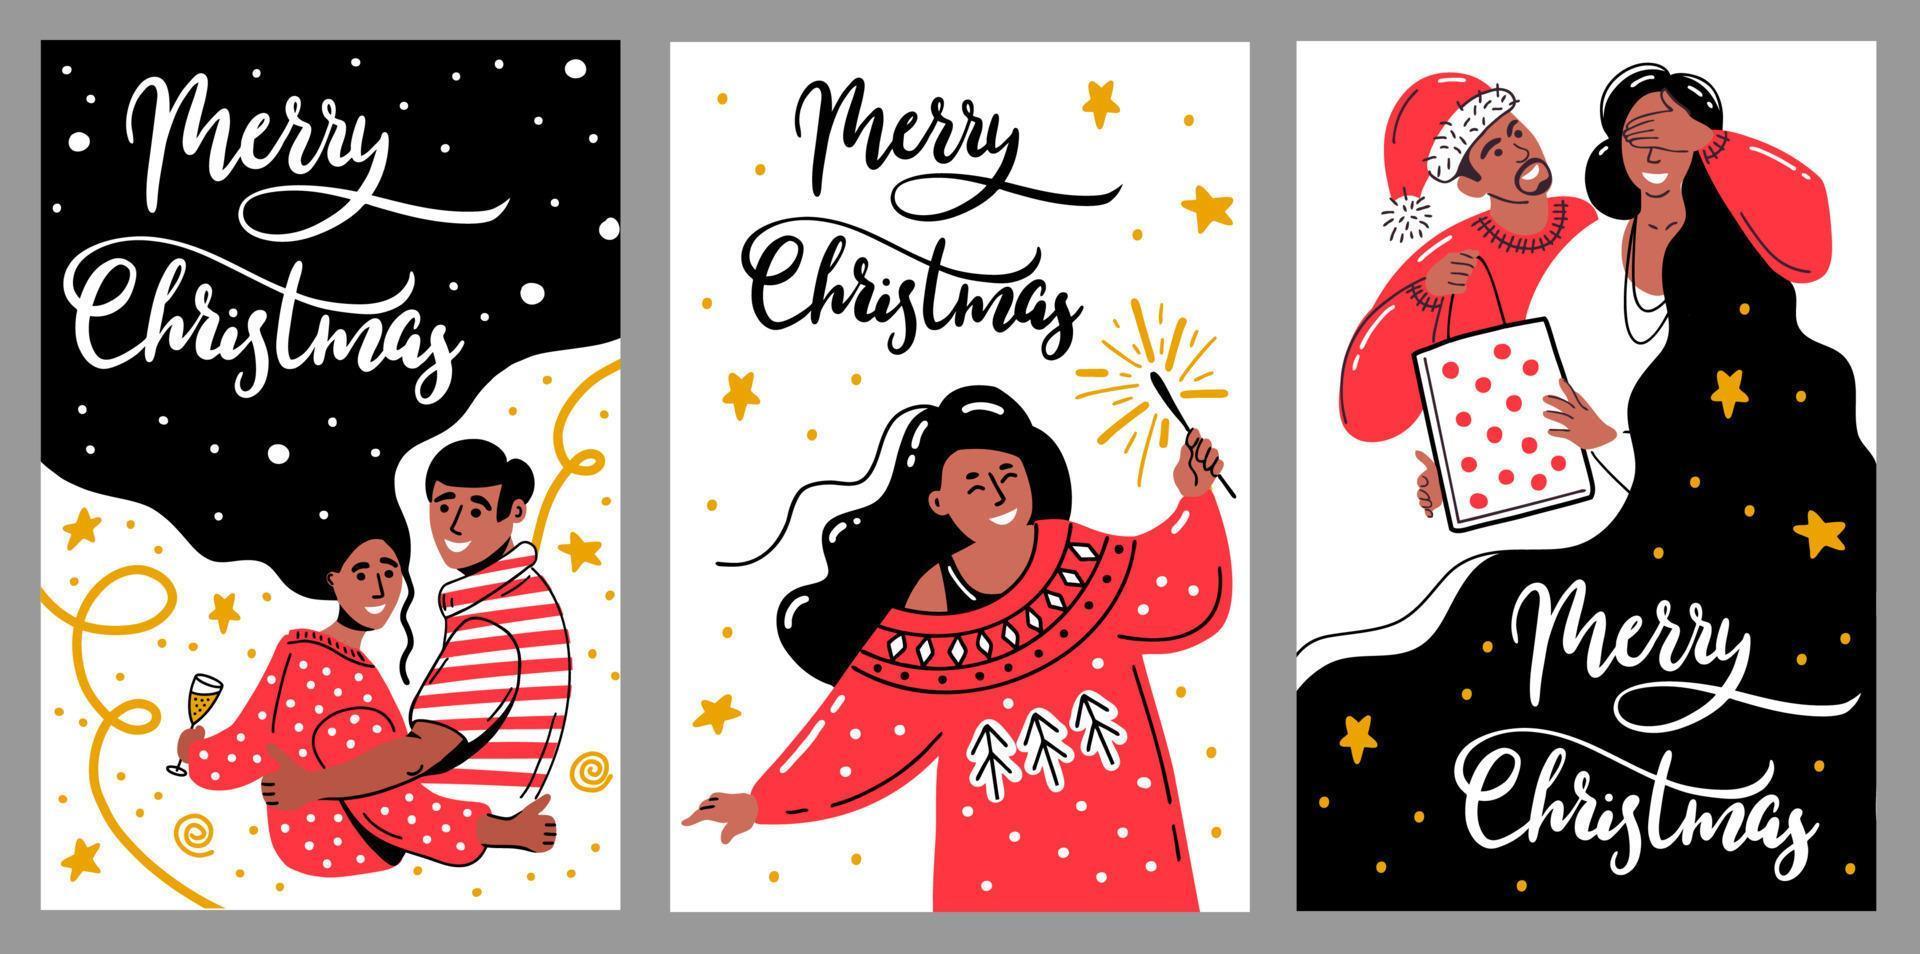 Vector set of Merry Christmas greeting cards. People celebrate Christmas, drink champagne, give gifts.